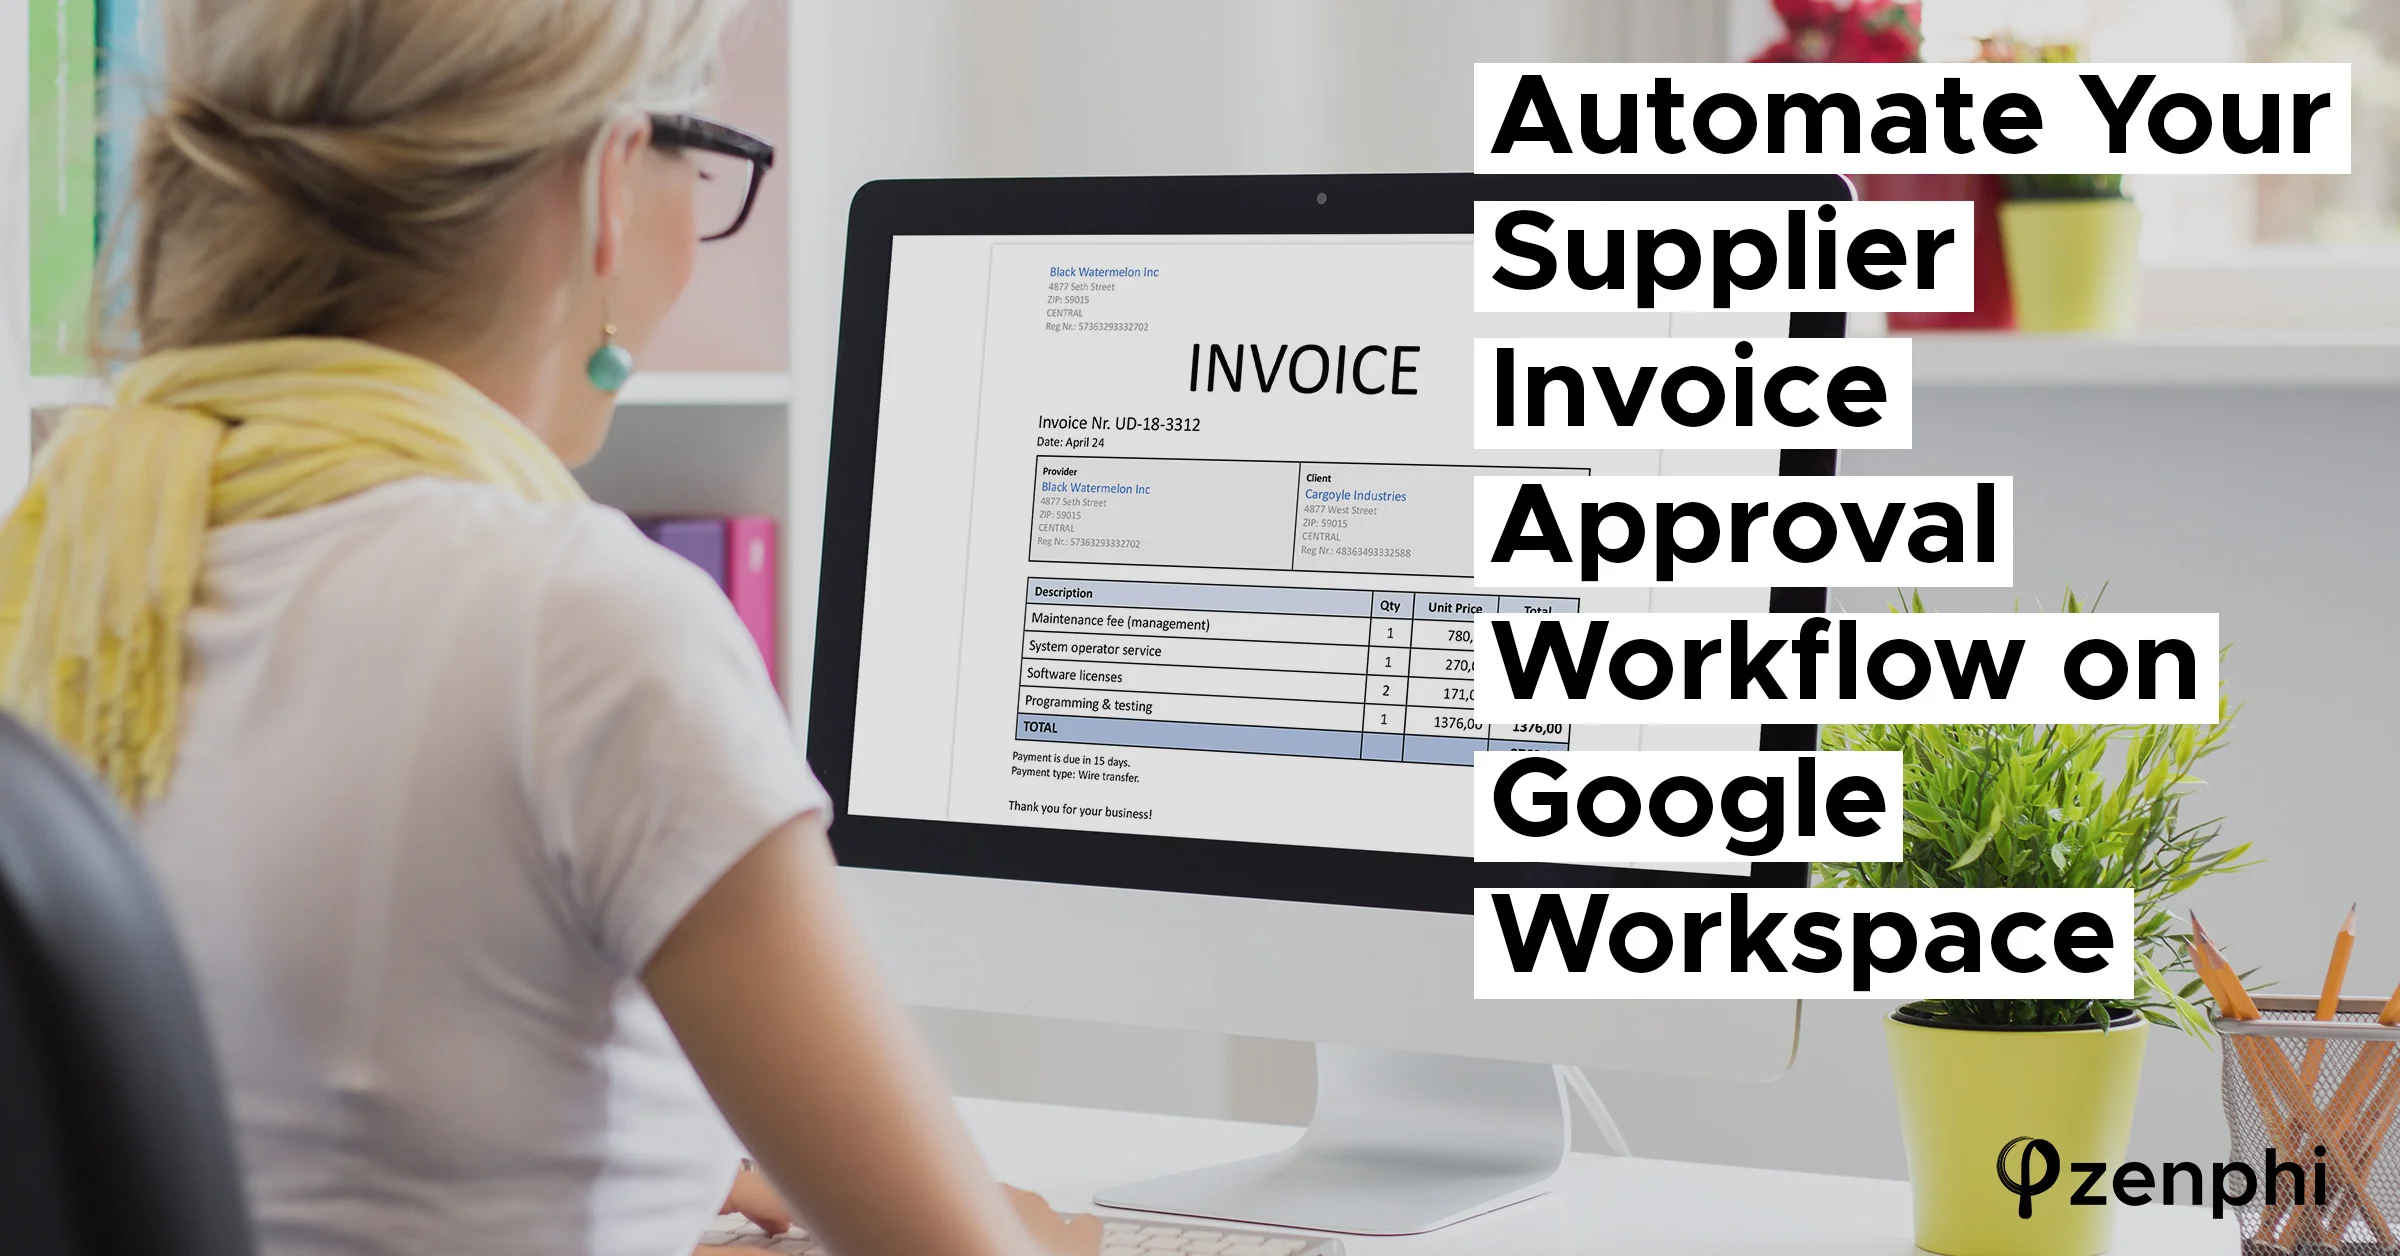 Automate Your Supplier Invoice Approval Workflow on Google Workspace